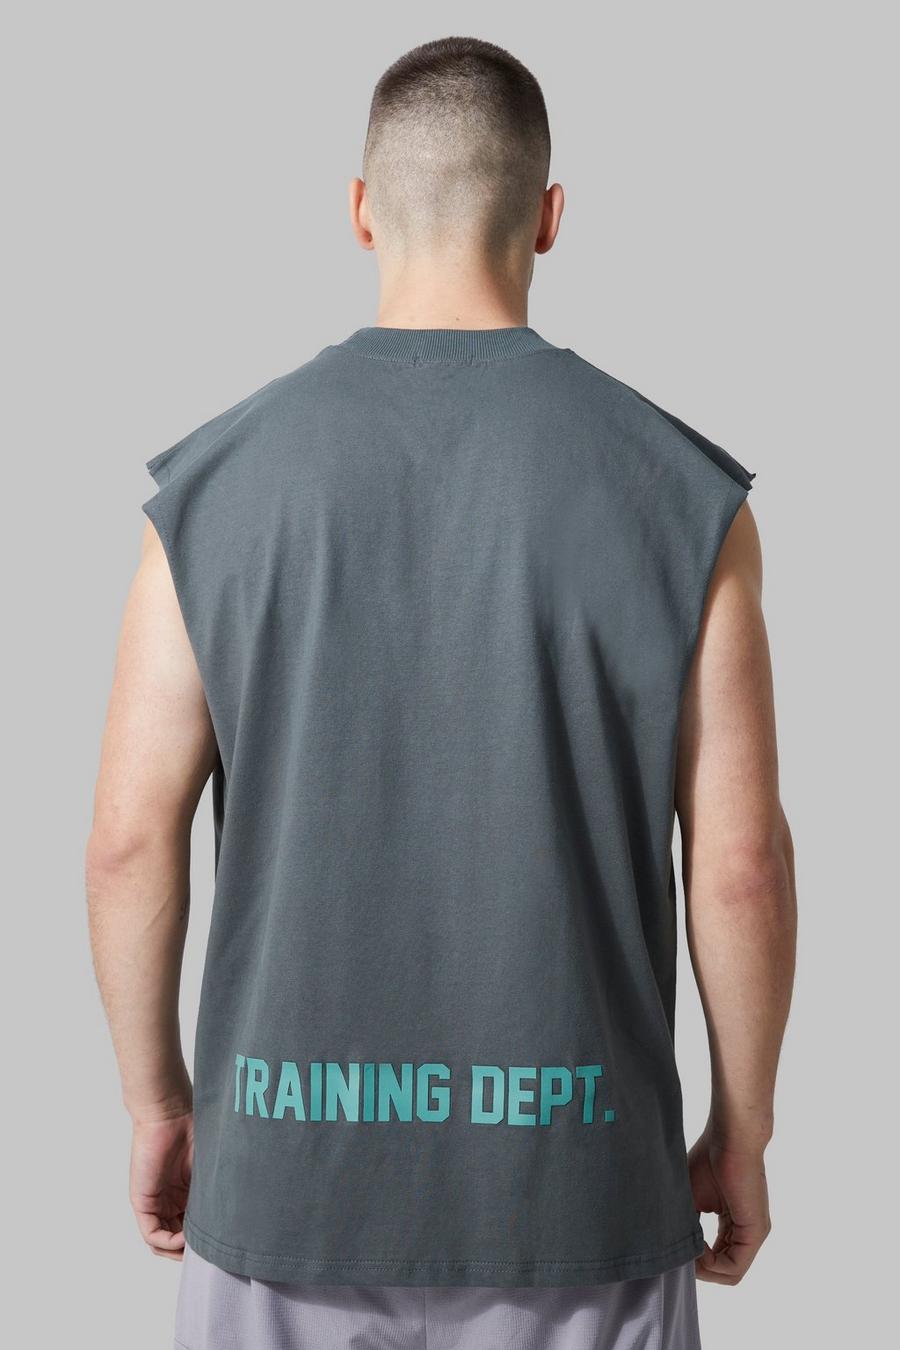 Charcoal grey Tall Active Training Dept Oversized Extended Tank